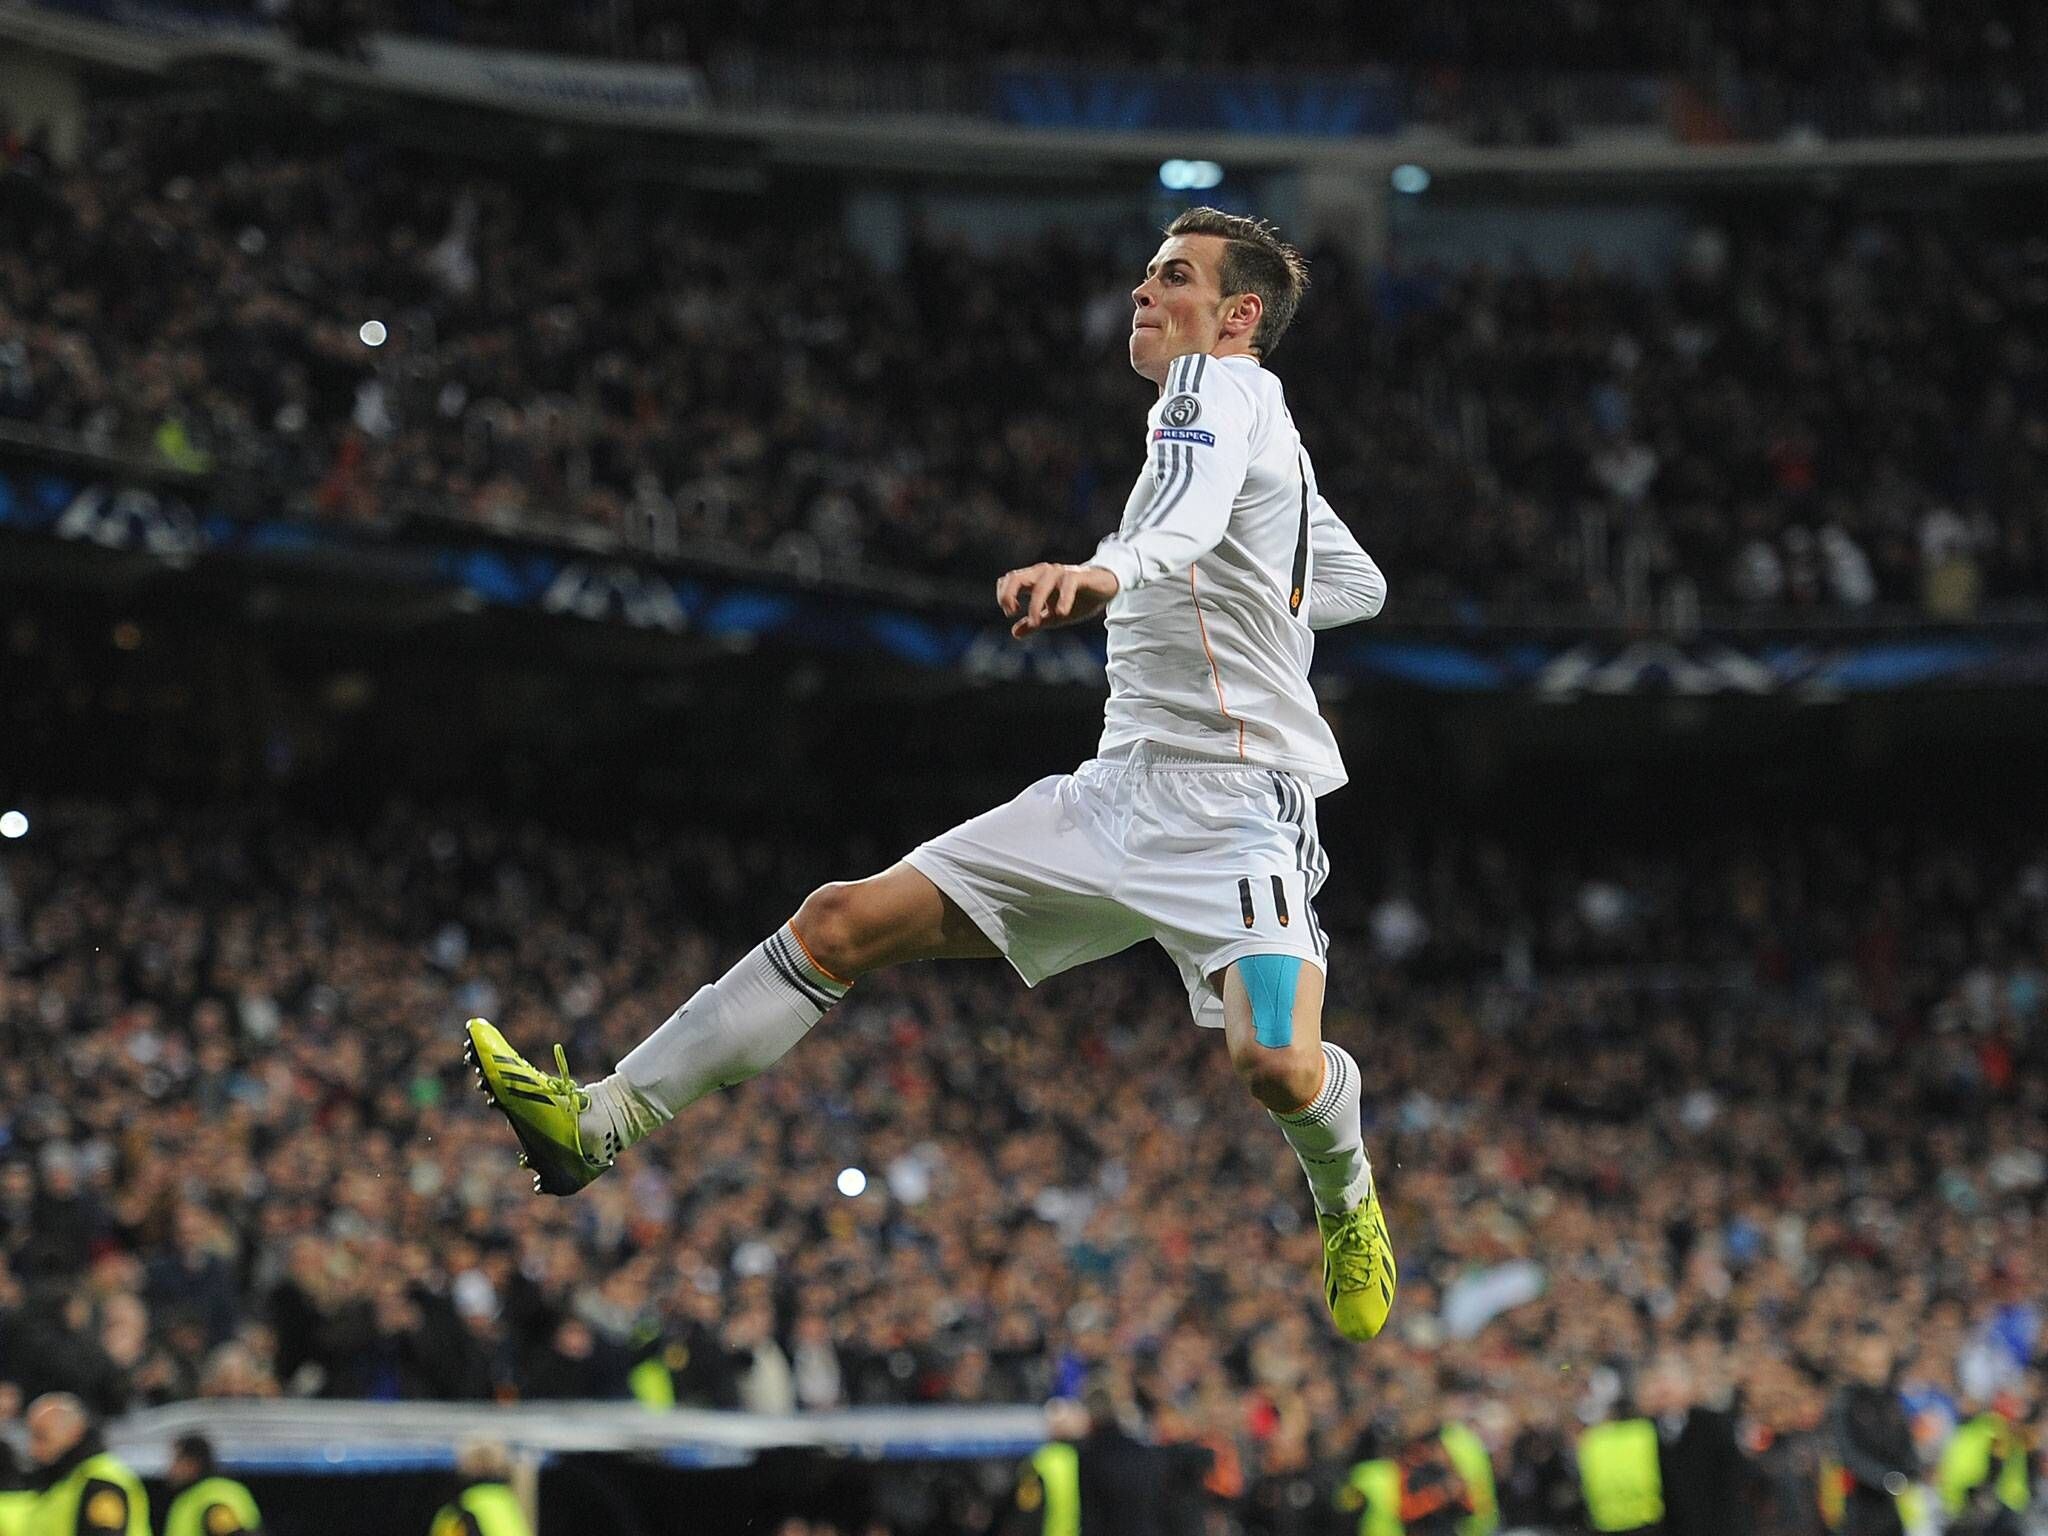 Gareth Bale: Real Madrid vs. Galatasaray, Celebration of his opening goal, UEFA Champions League. 2050x1540 HD Background.